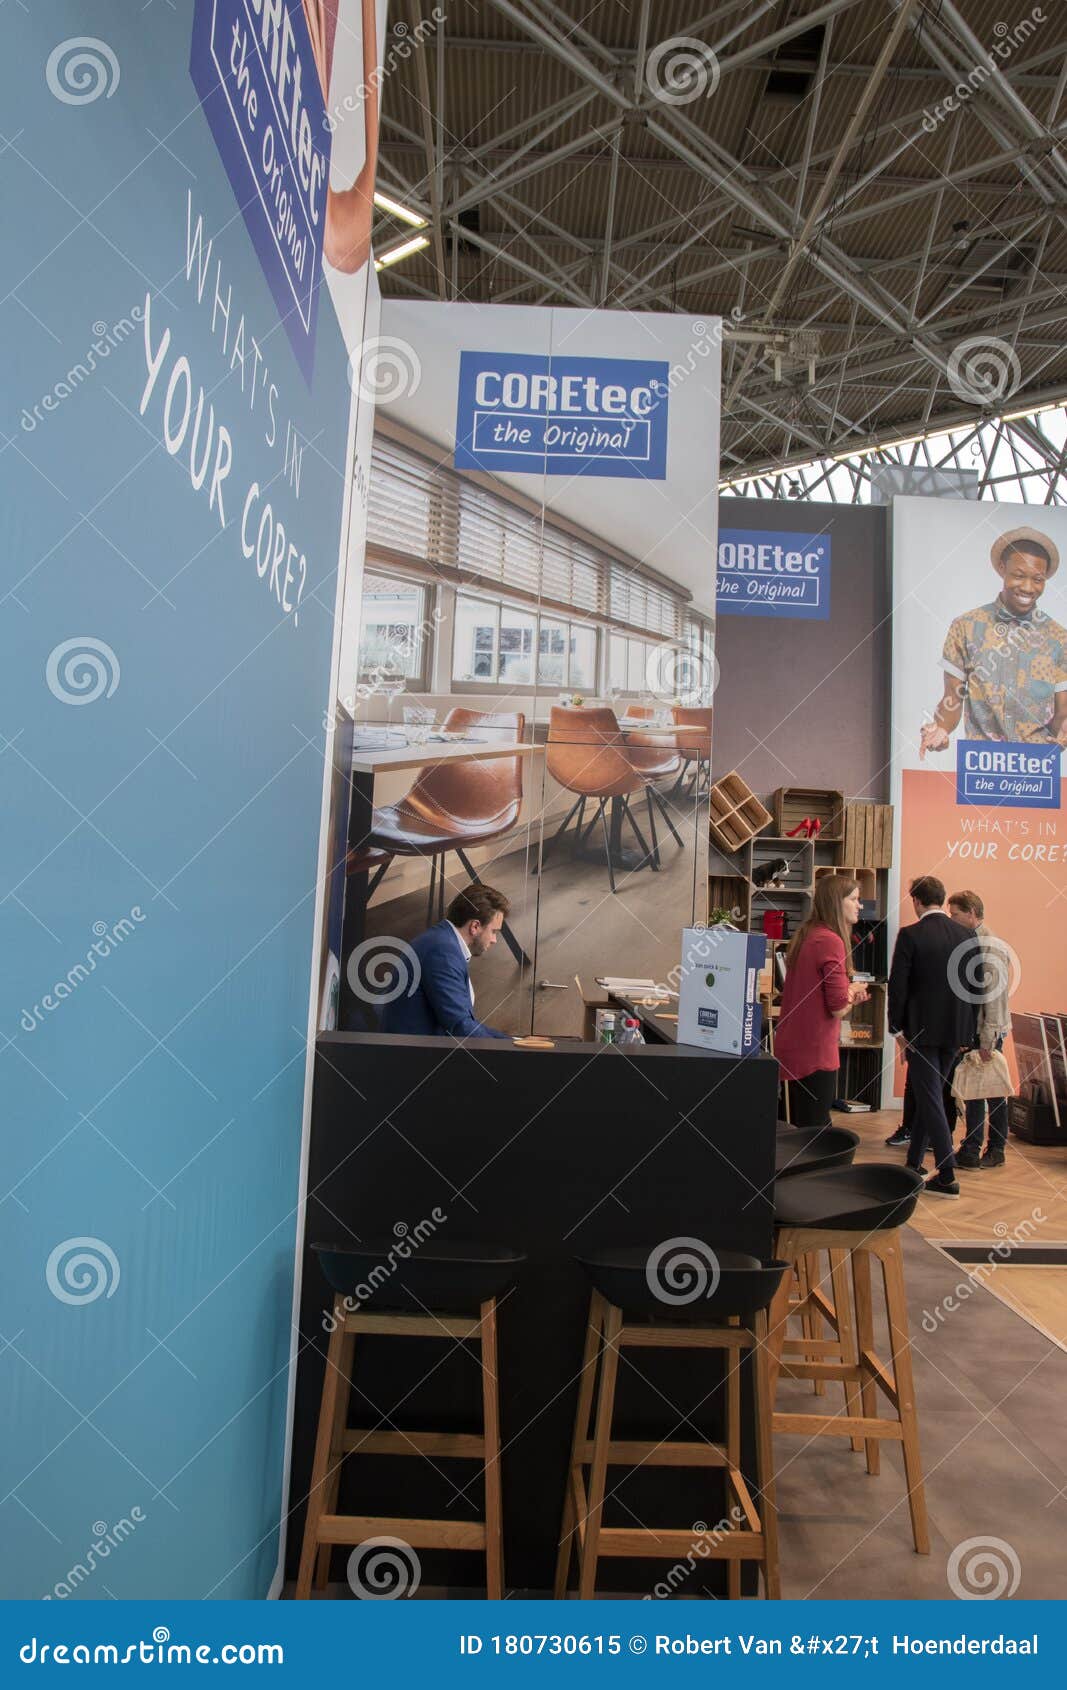 Ongeschikt koffer Flash Coretec Stand at VT Wonen & Design at the Wonen & Design Beurs Exhibition  at the Rai Complex Amsterdam the Netherlands 2019 Editorial Image - Image  of rooms, selling: 180730615